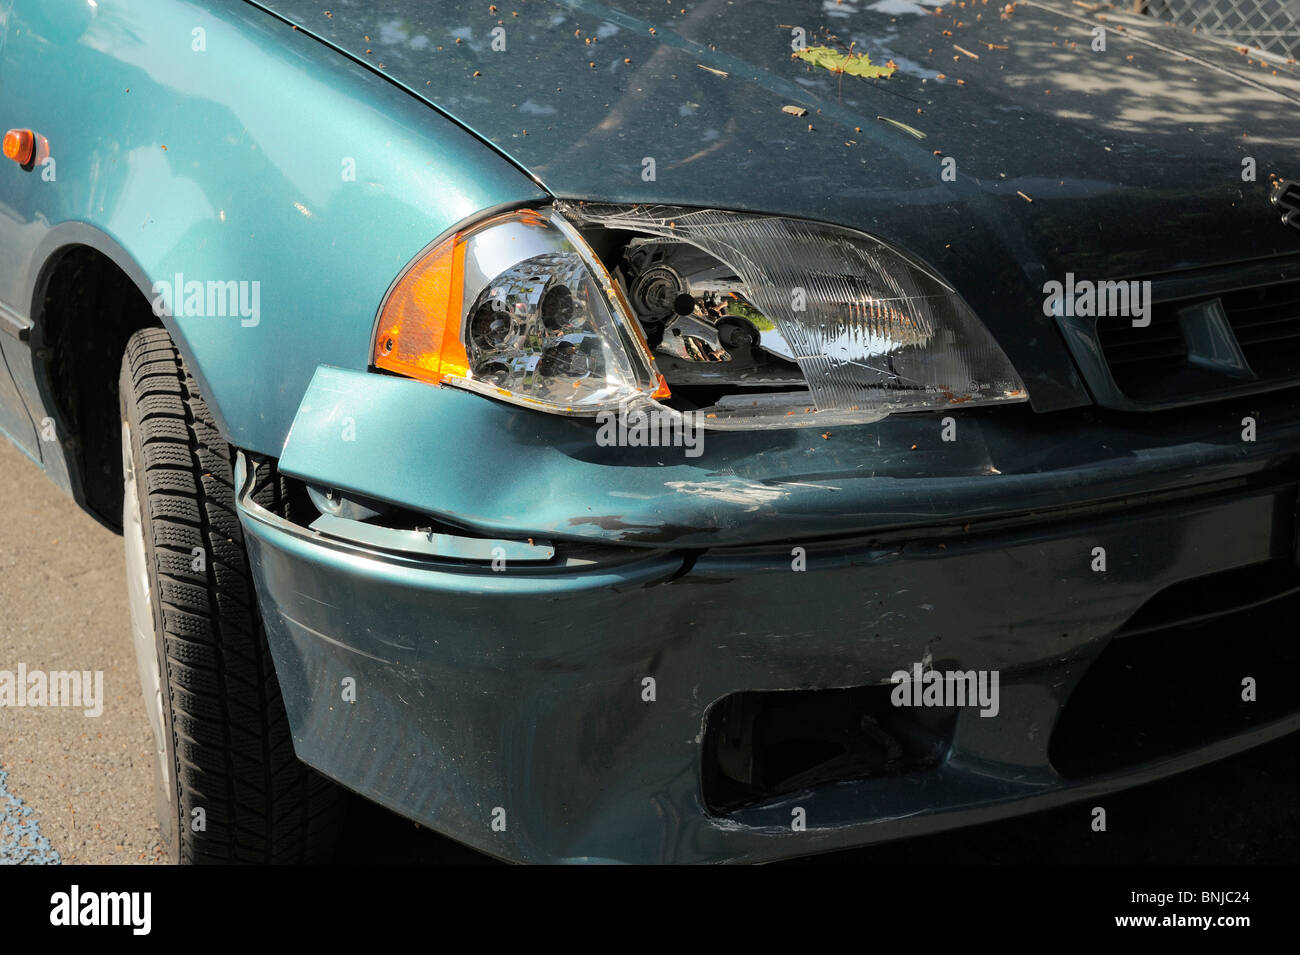 Imported Accidental Damaged Cars in Pakistan 